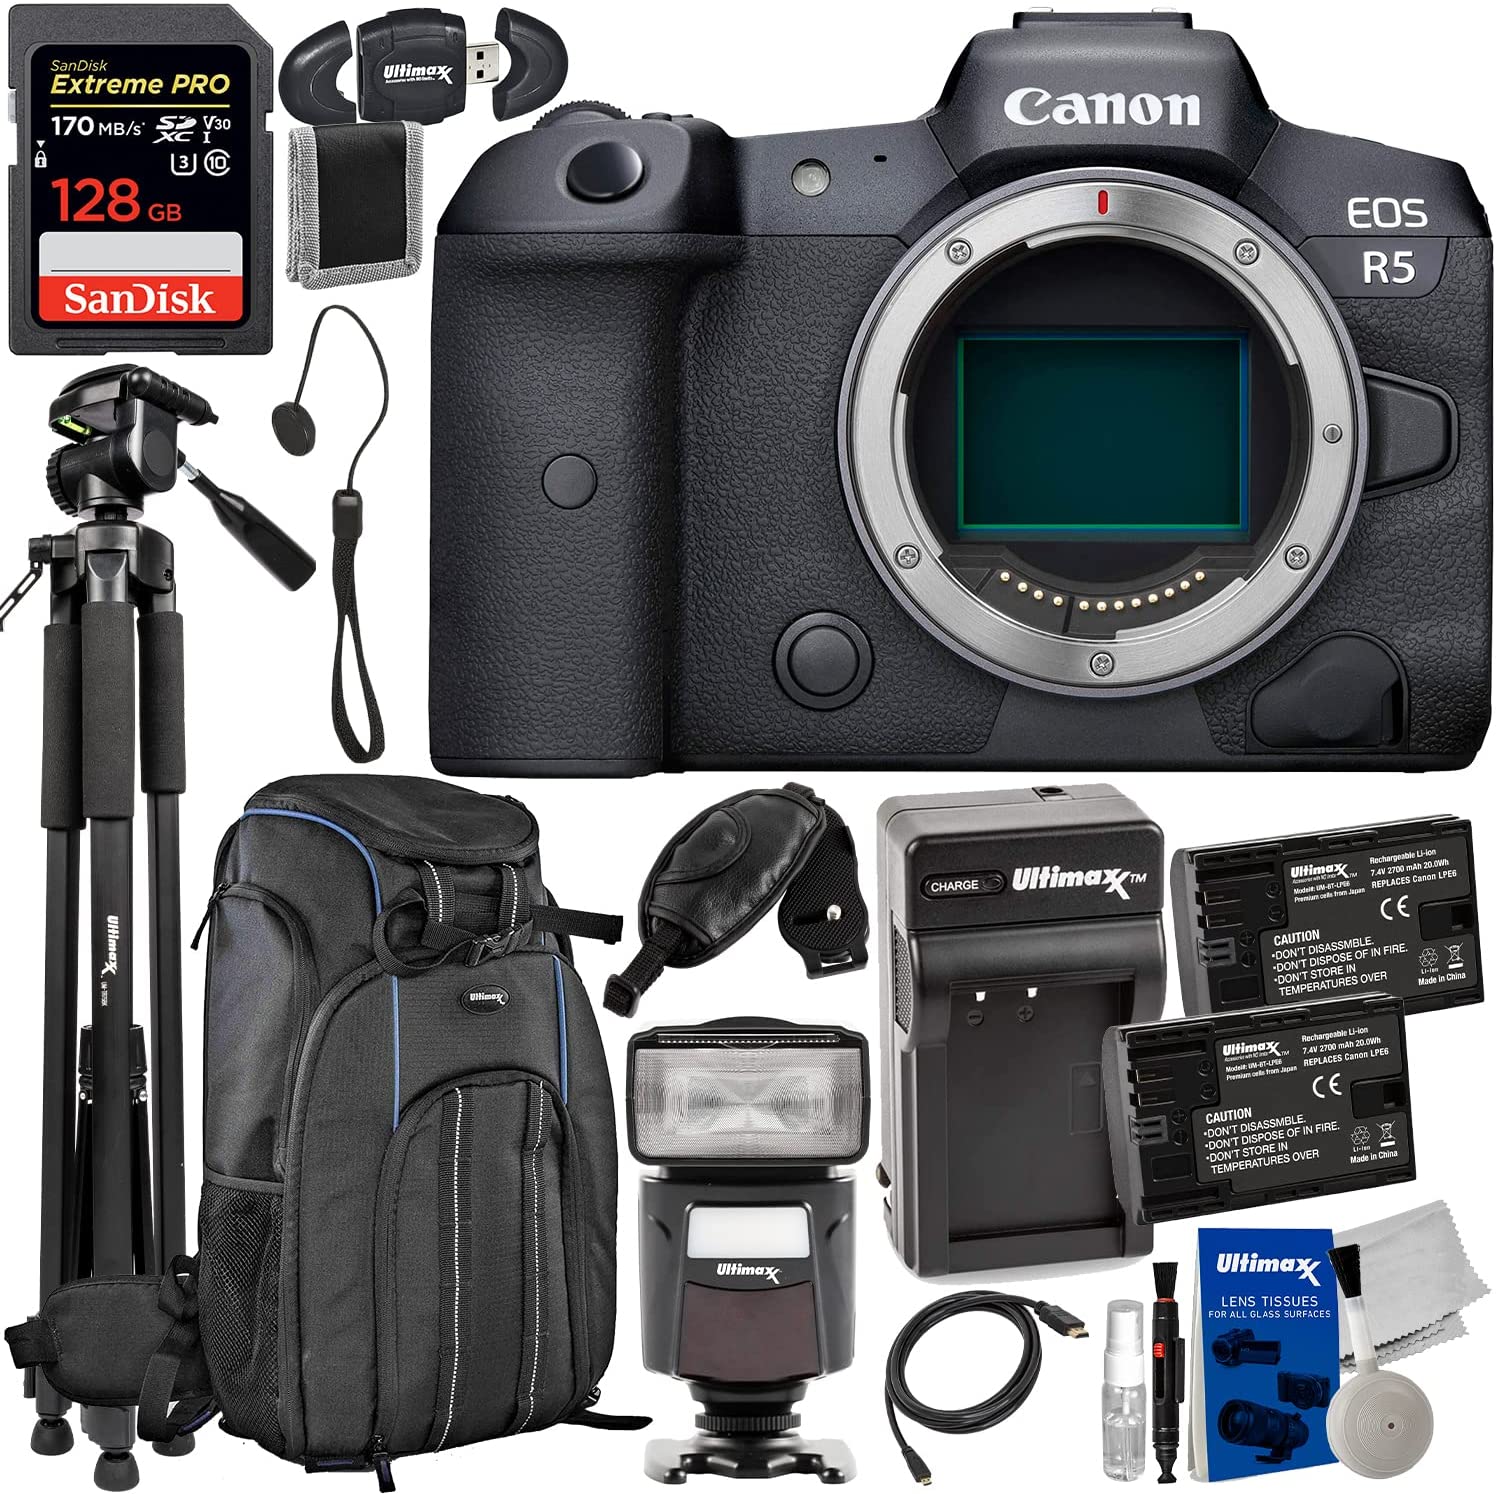 Canon EOS R5 Mirrorless Camera (Body Only) + SD 128GB Extreme Pro SDXC, Deluxe Water-Resistant Backpack, Lightweight 75â? Tripod, 2X Extended Life Batteries w/Travel Charger & Much More (25pc Bundle)